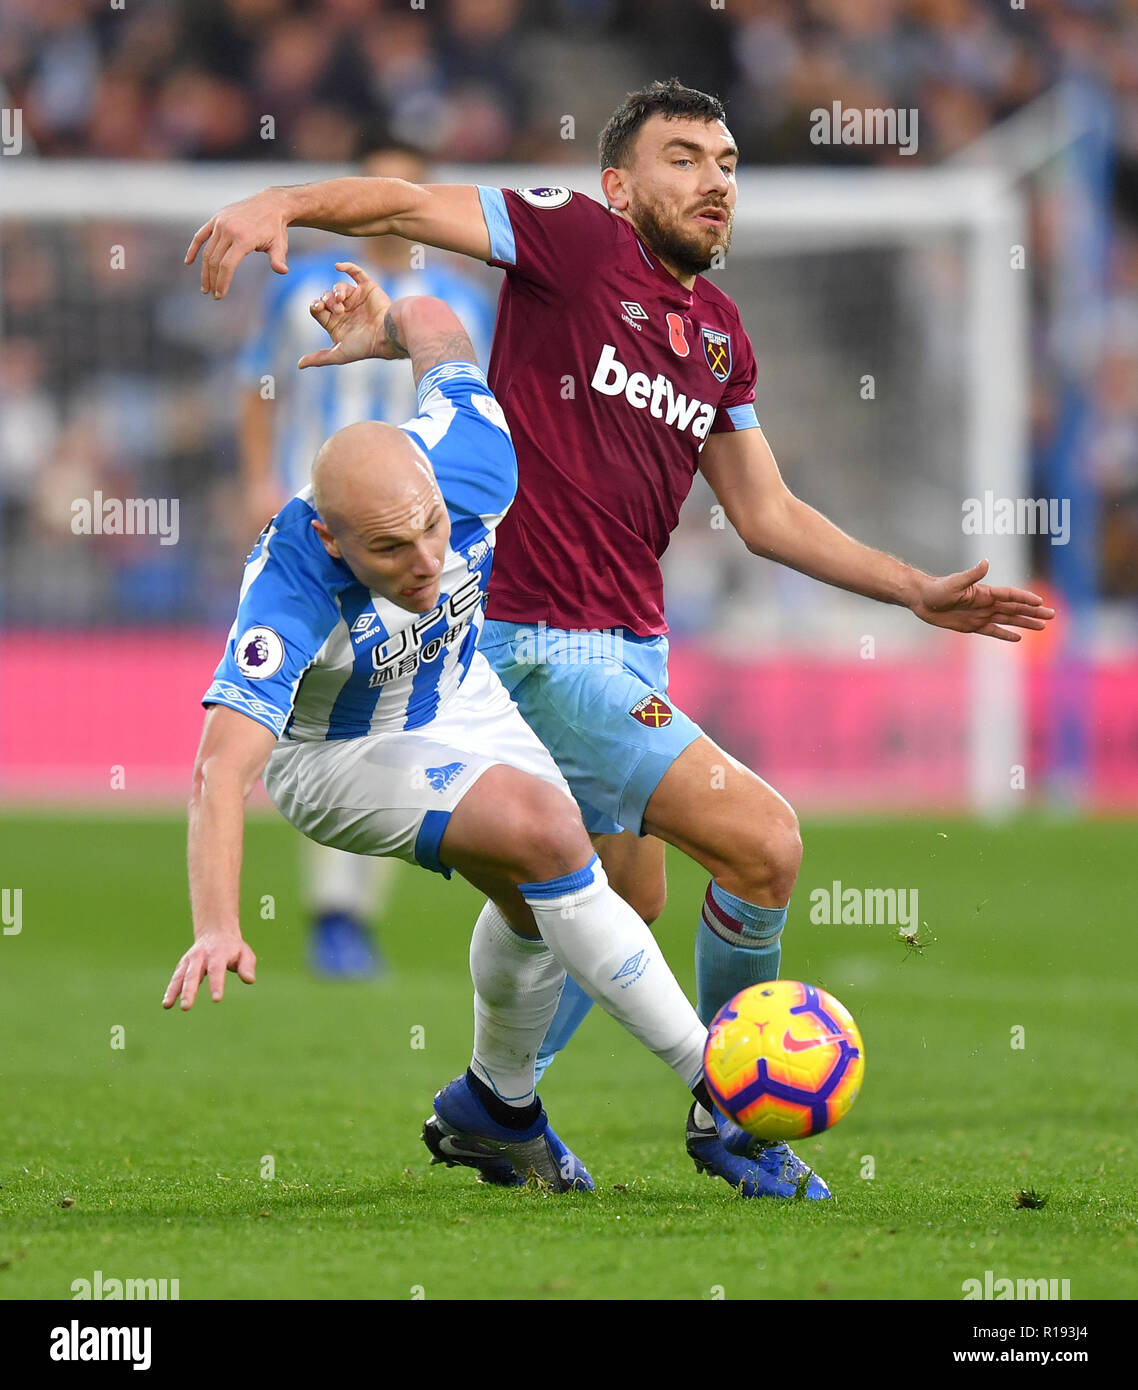 Huddersfield Town's Aaron Mooy (left) and West Ham United's Robert Snodgrass battle for the ball during the Premier League match at the John Smith's Stadium, Huddersfield. Stock Photo